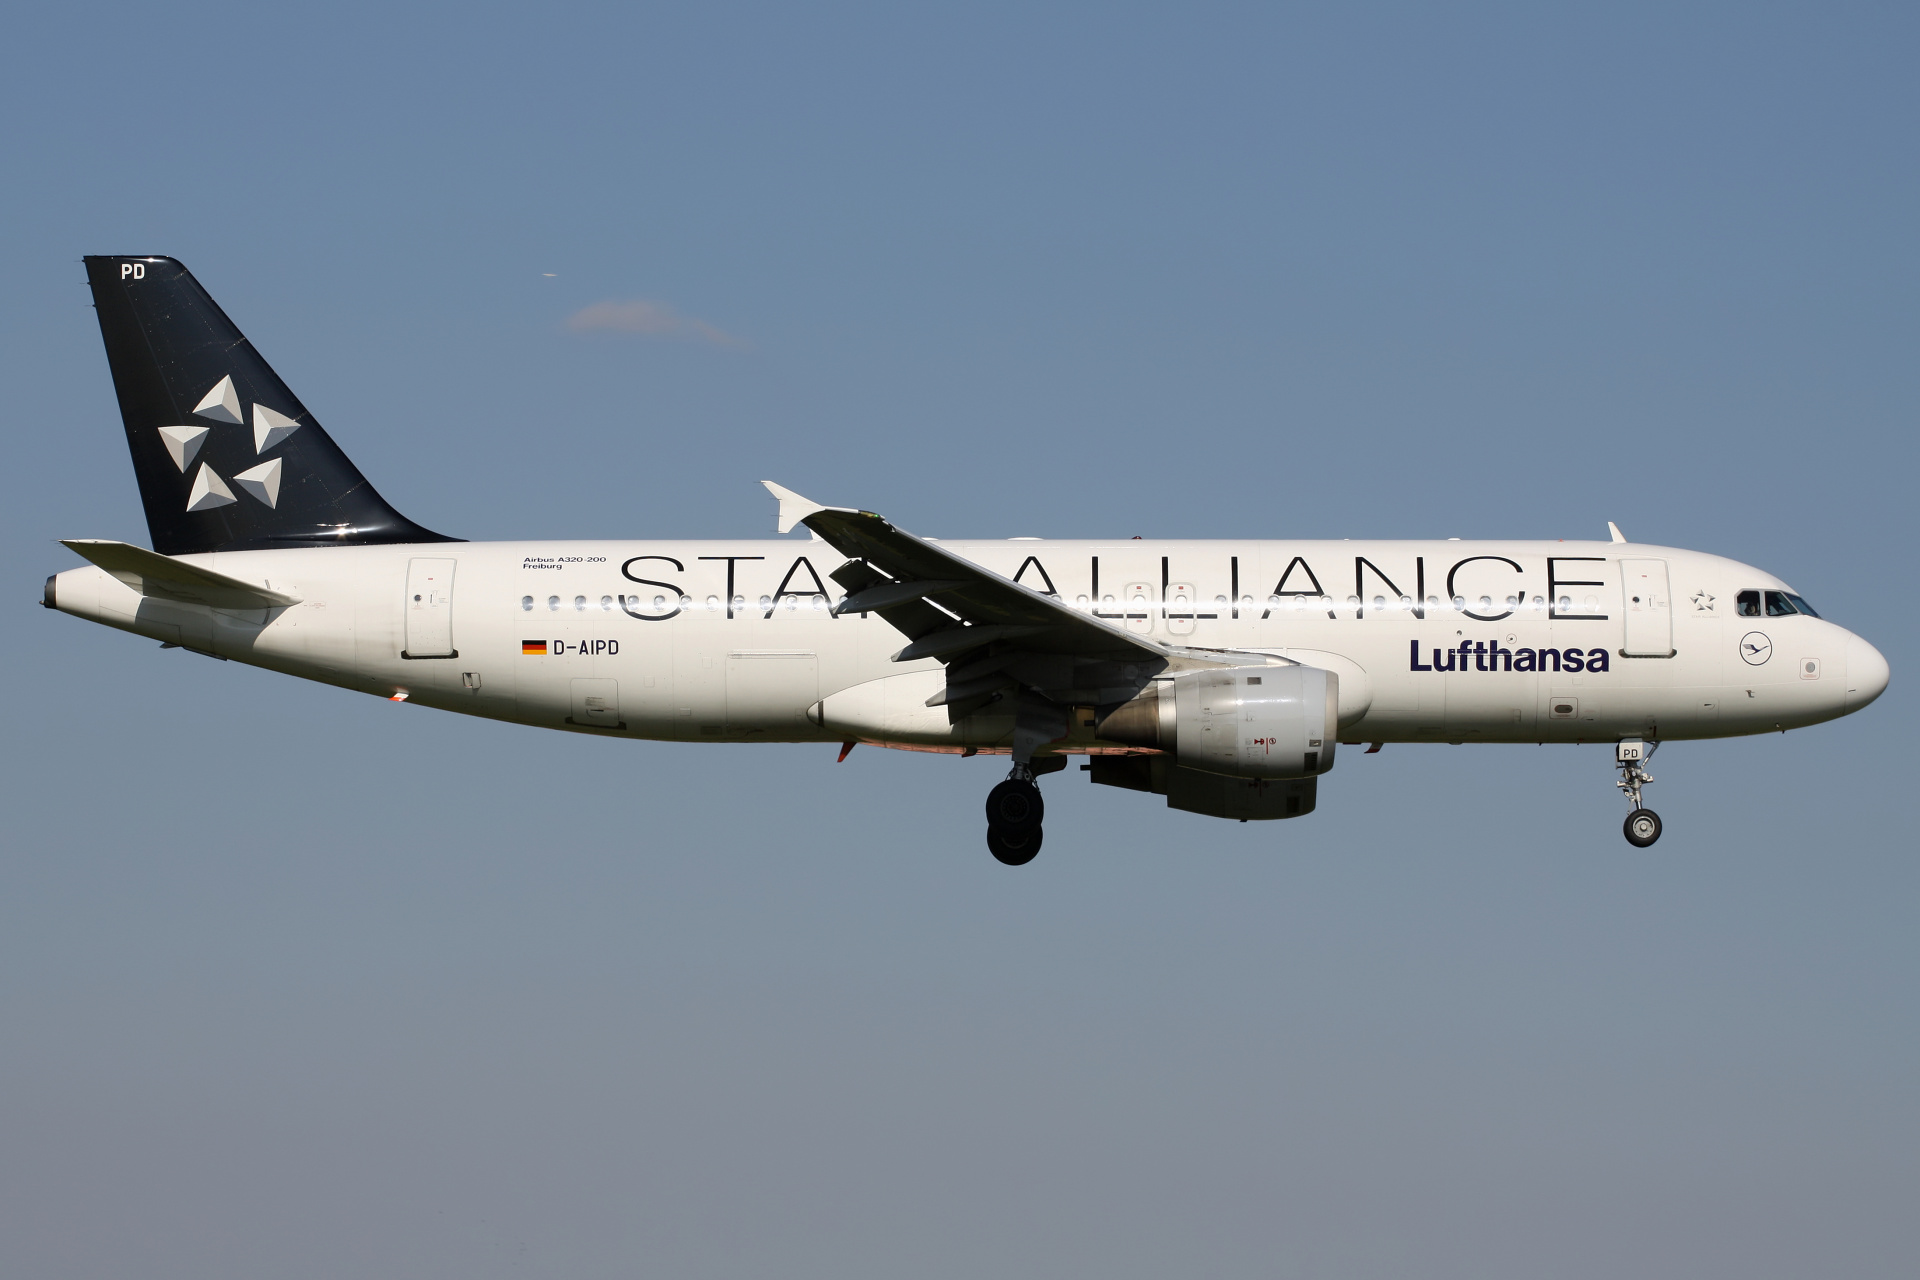 D-AIPD (Star Alliance livery) (Aircraft » EPWA Spotting » Airbus A320-200 » Lufthansa)